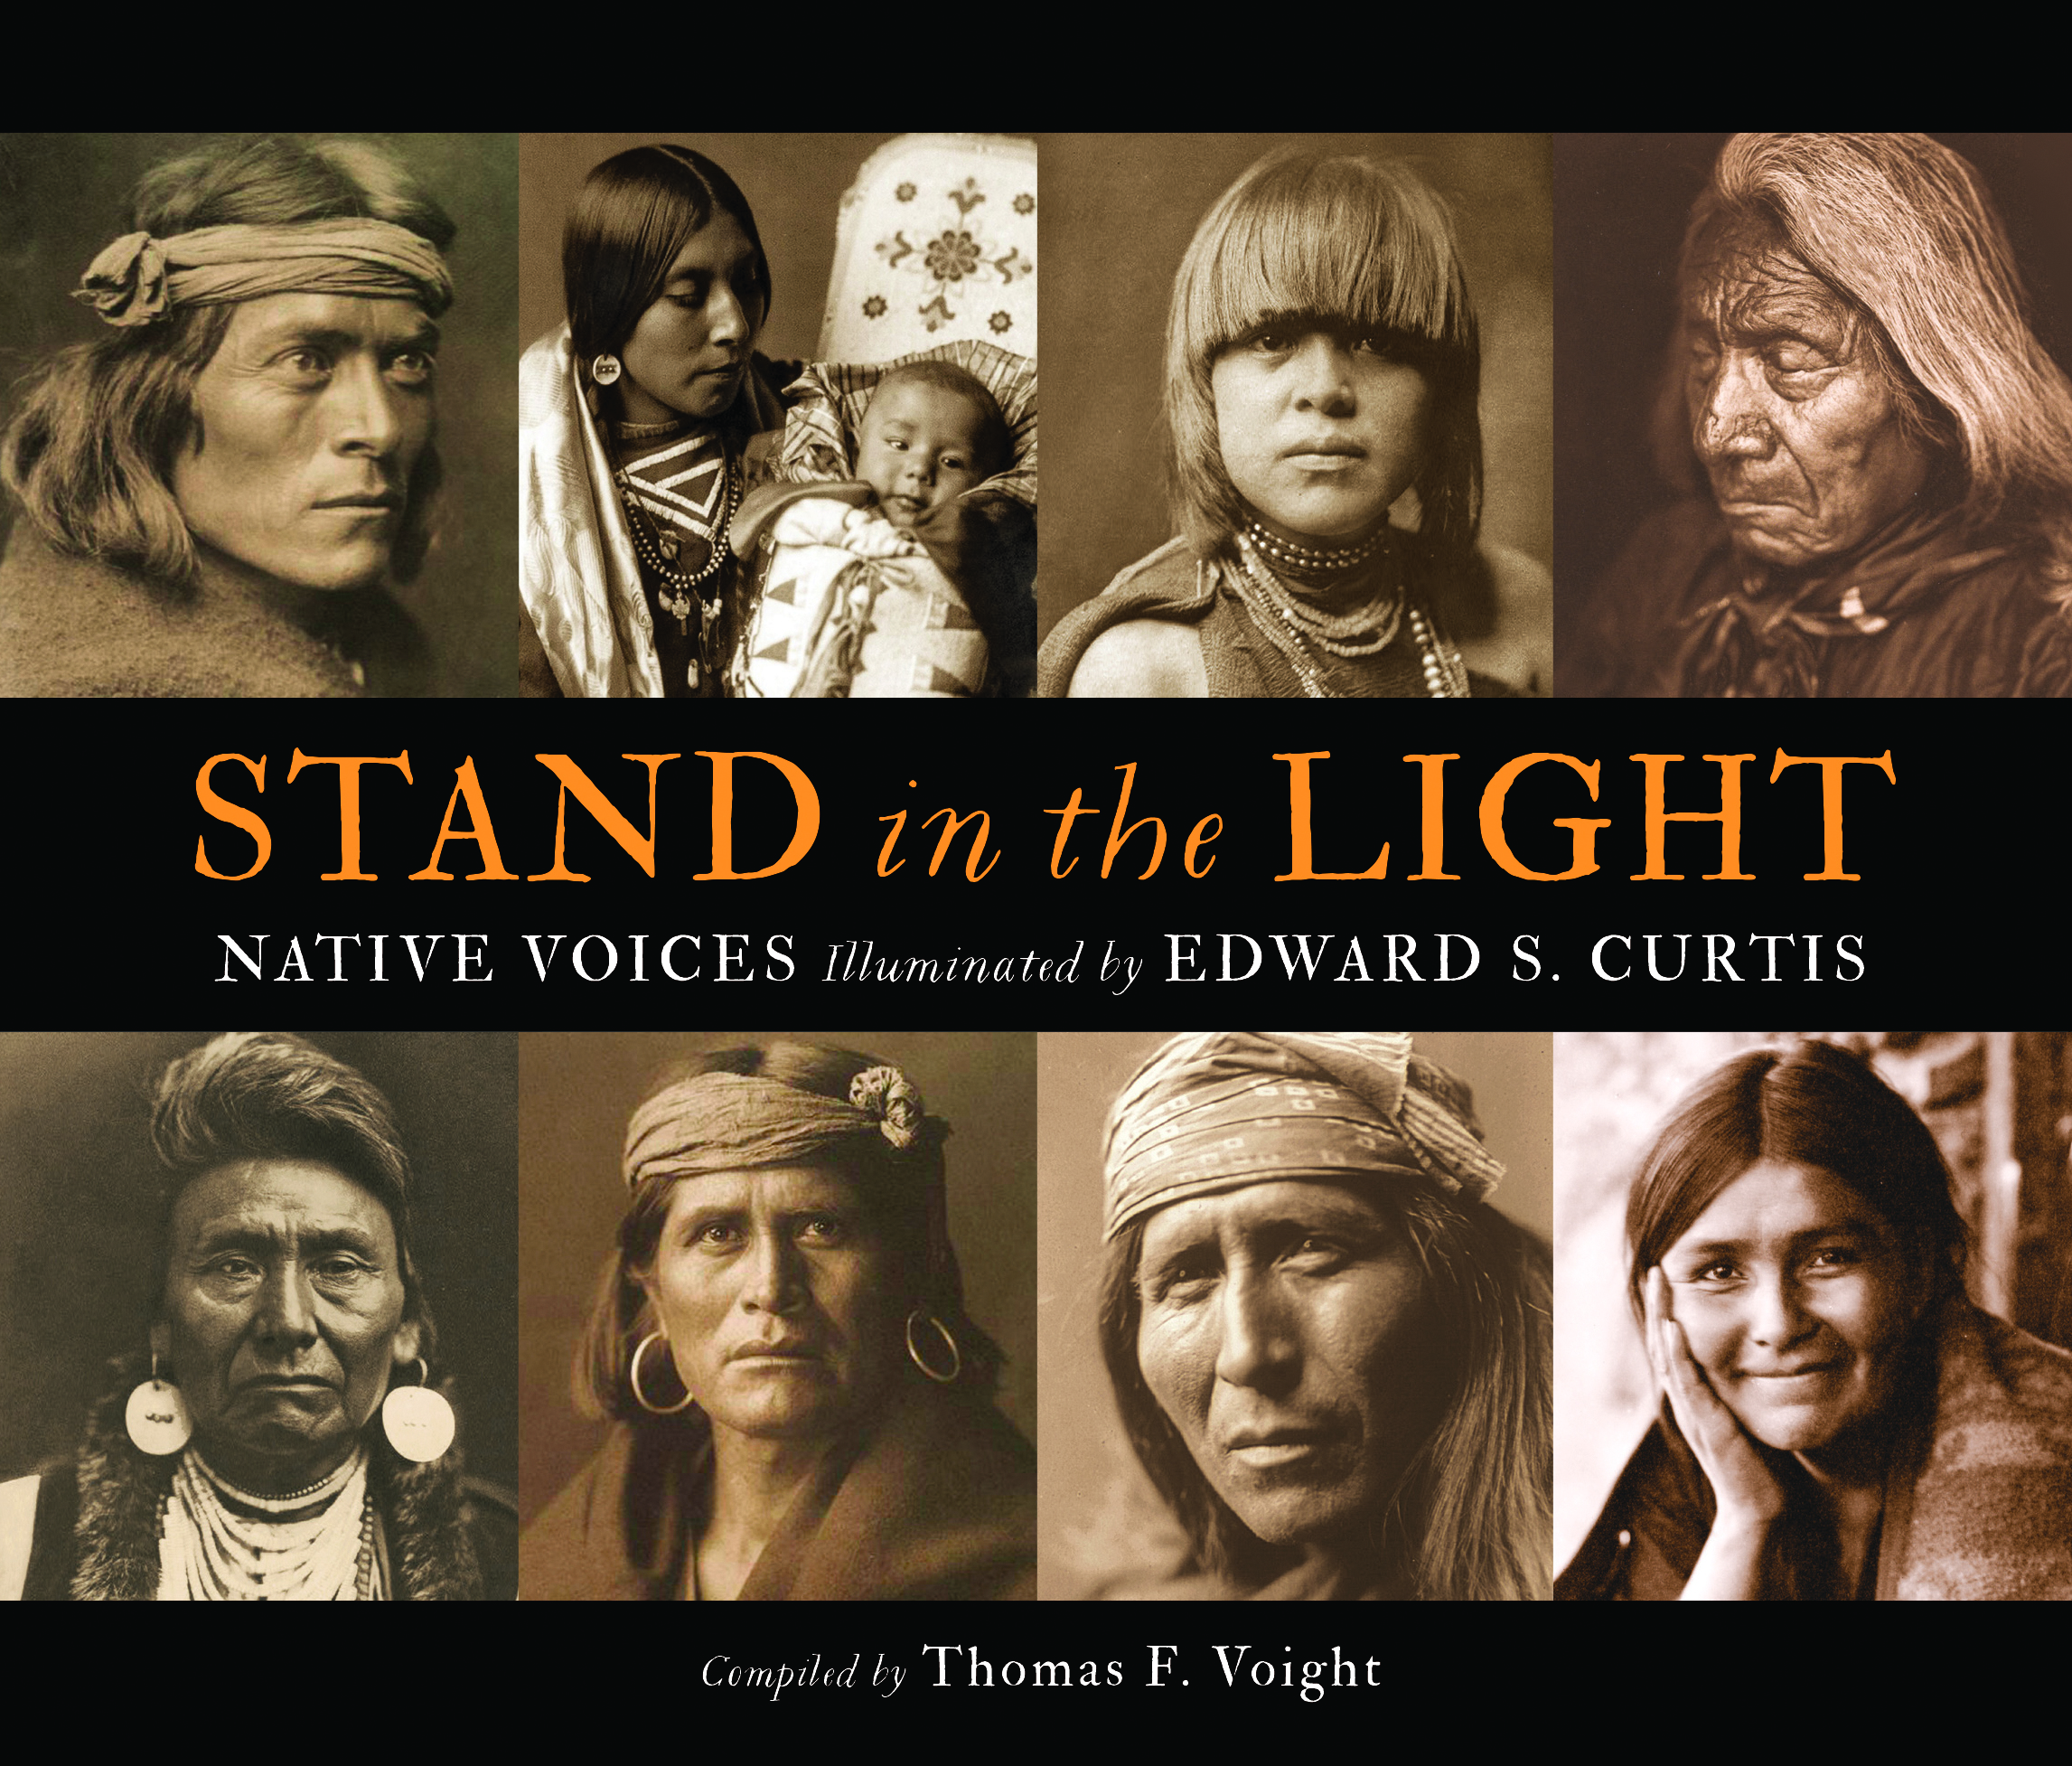 Stand in Light: Native Voices Illuminated by Edward Curtis – Rio Nuevo